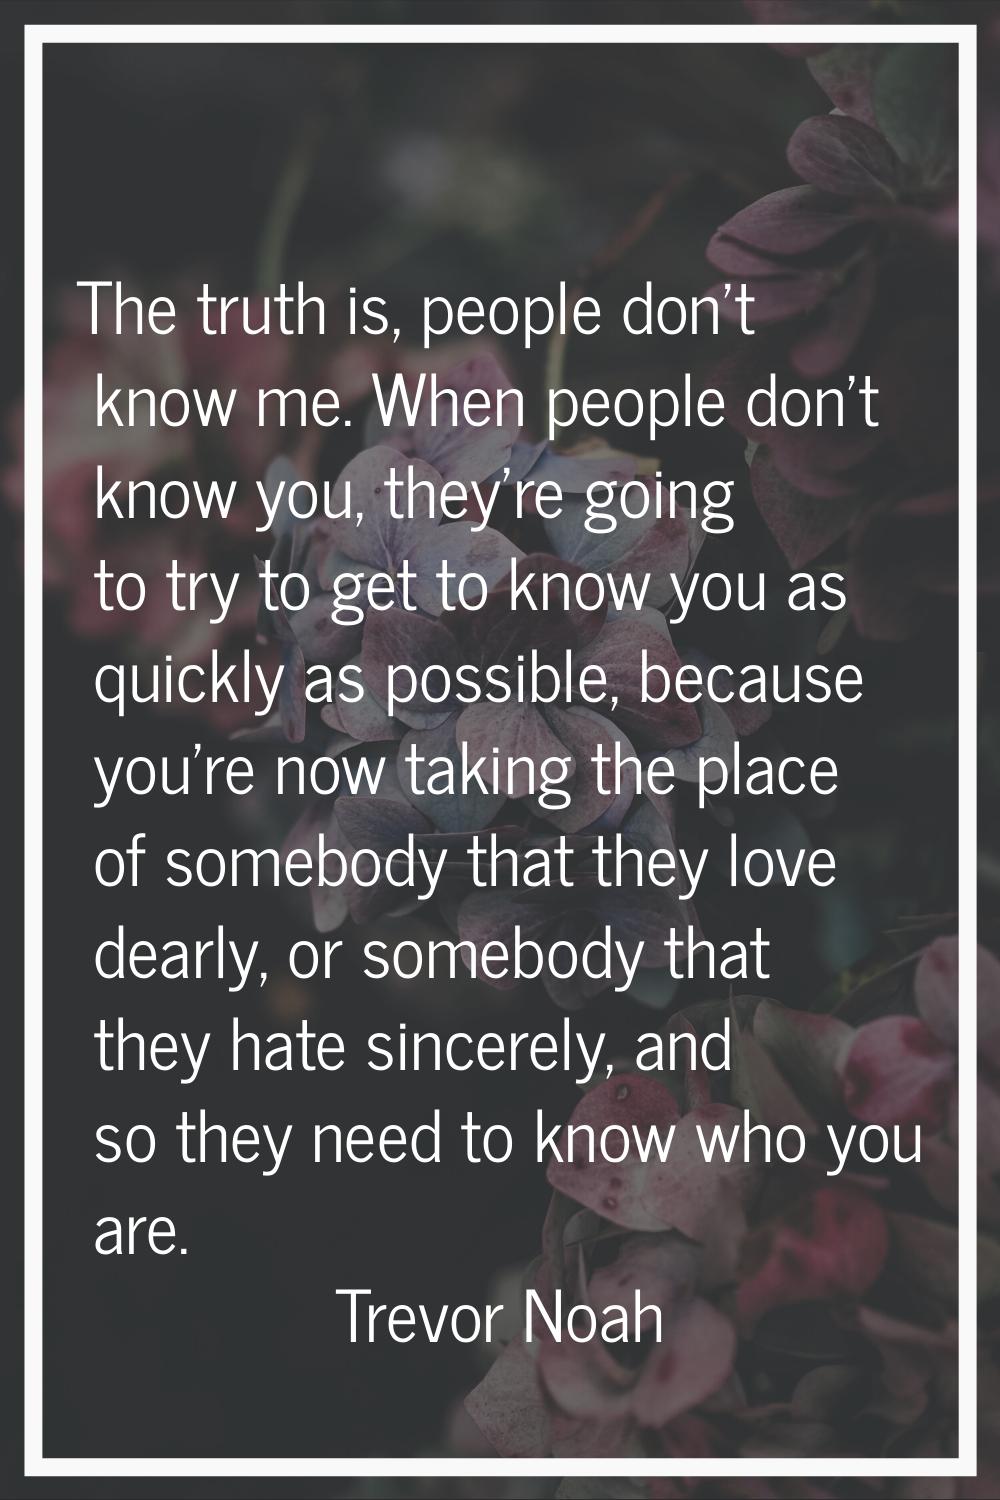 The truth is, people don't know me. When people don't know you, they're going to try to get to know